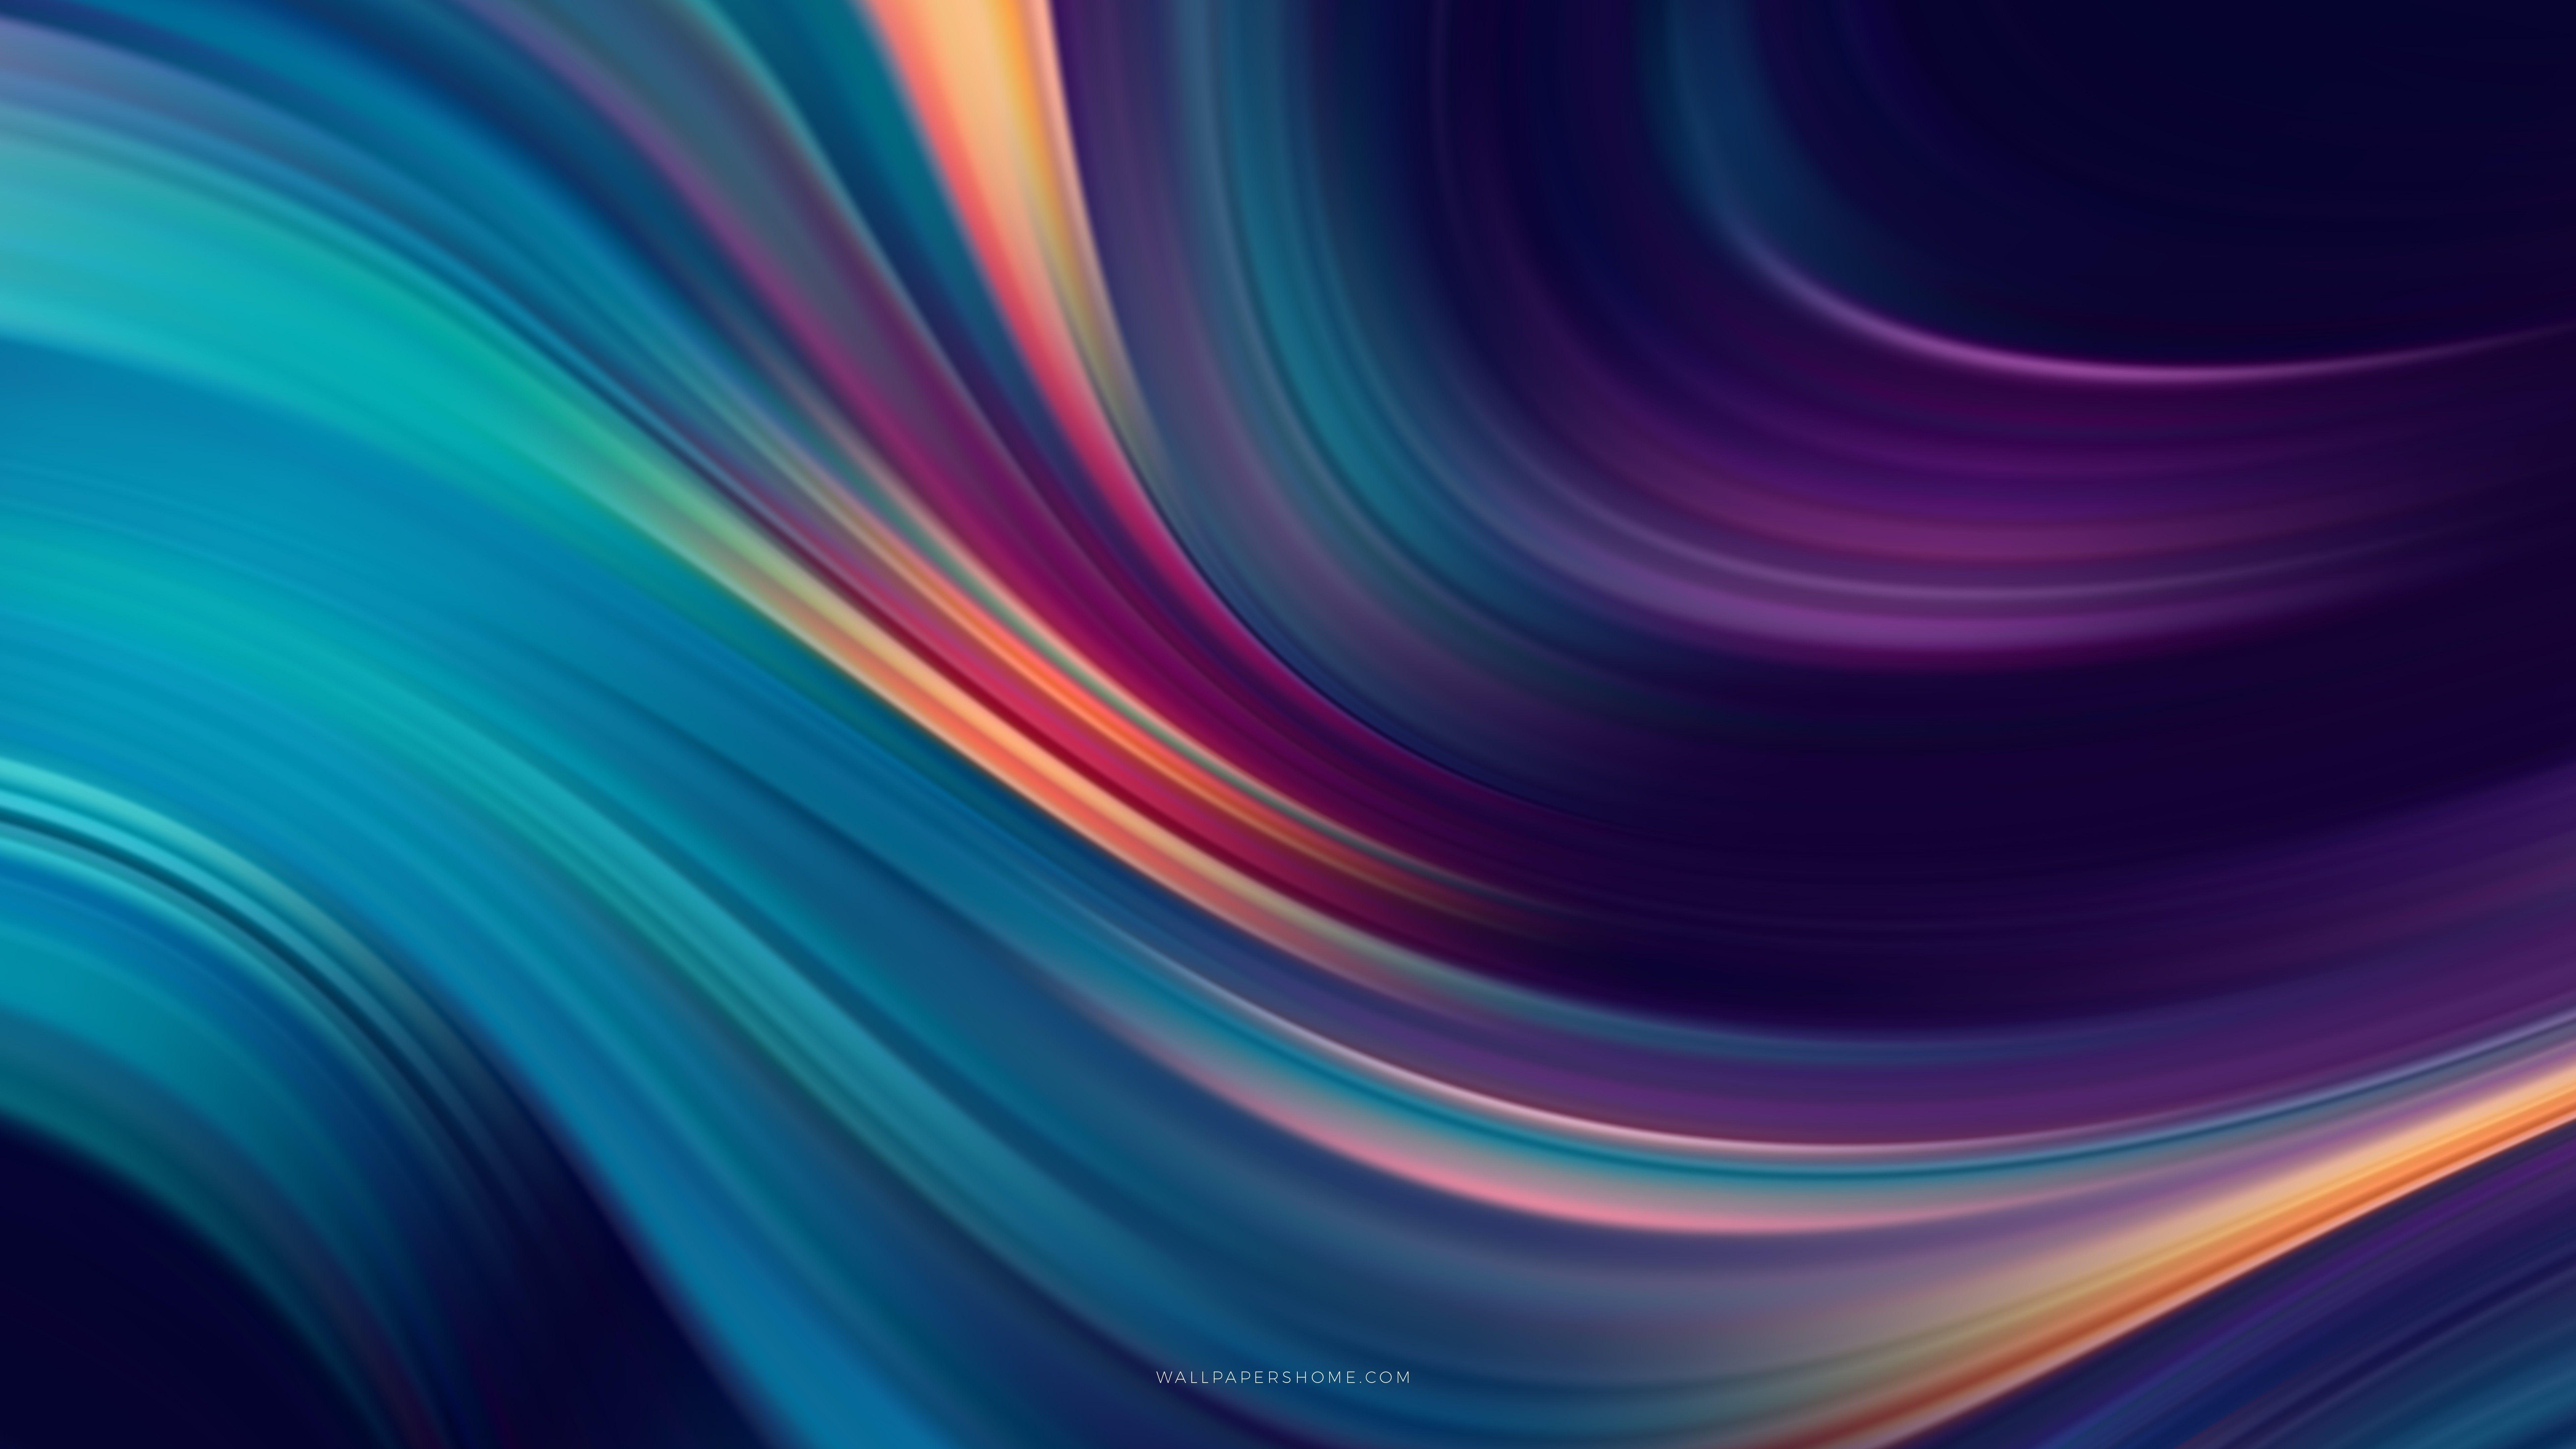  Color  8k  Wallpapers Top Free Color  8k  Backgrounds 